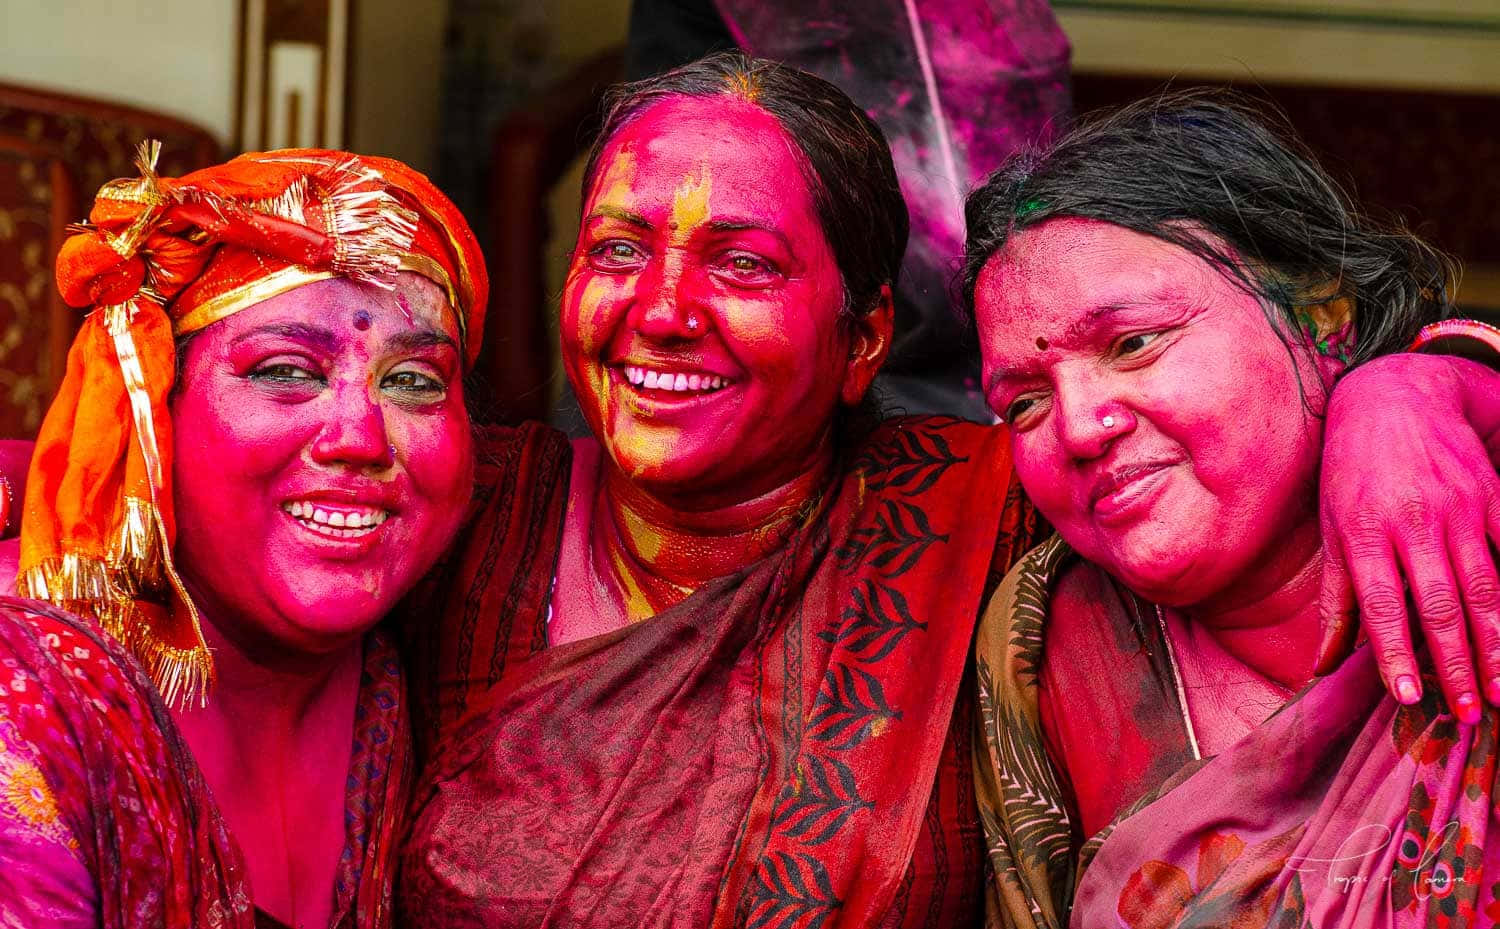 "Celebrate the Play of Colors During Holi"